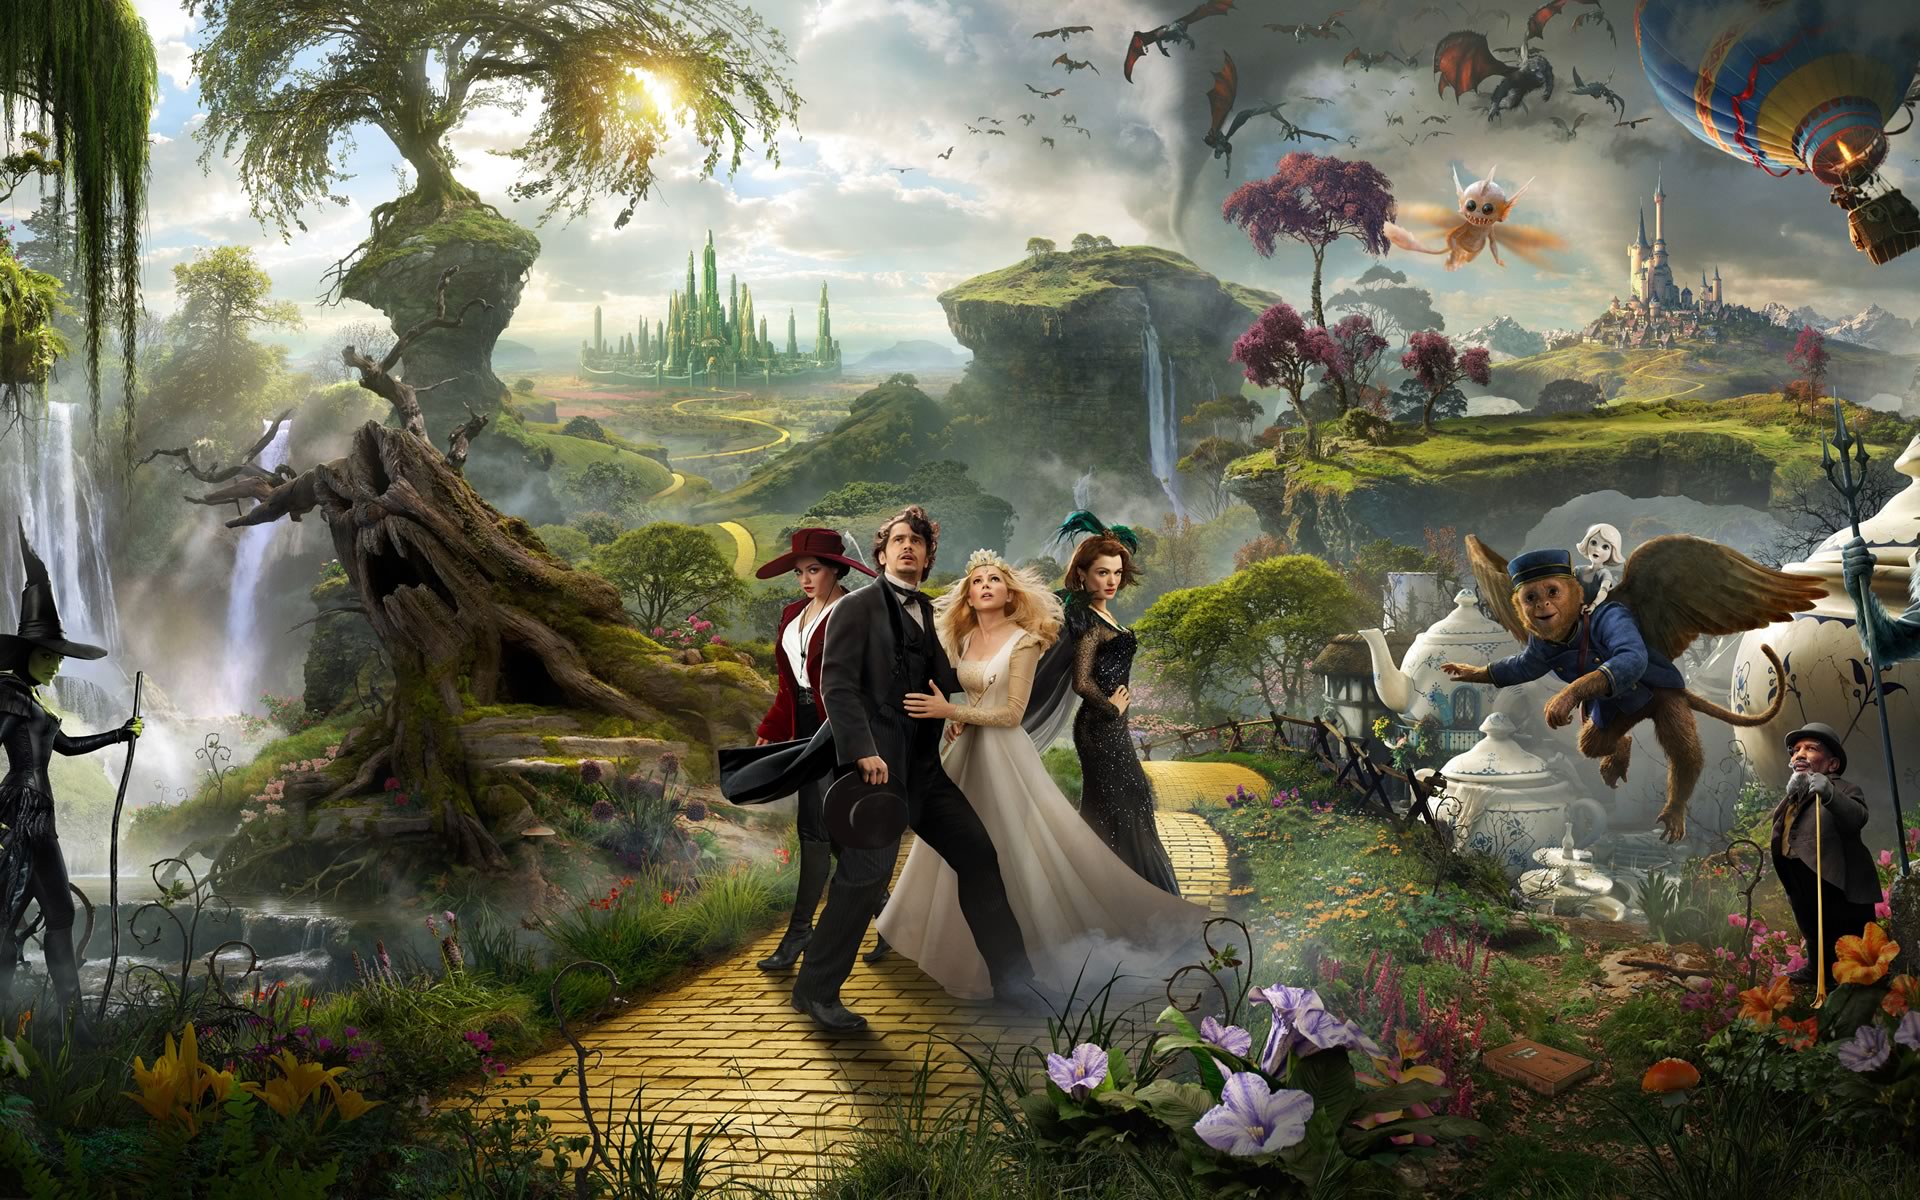 download wallpaper: Oz the Great and Powerful wallpaper